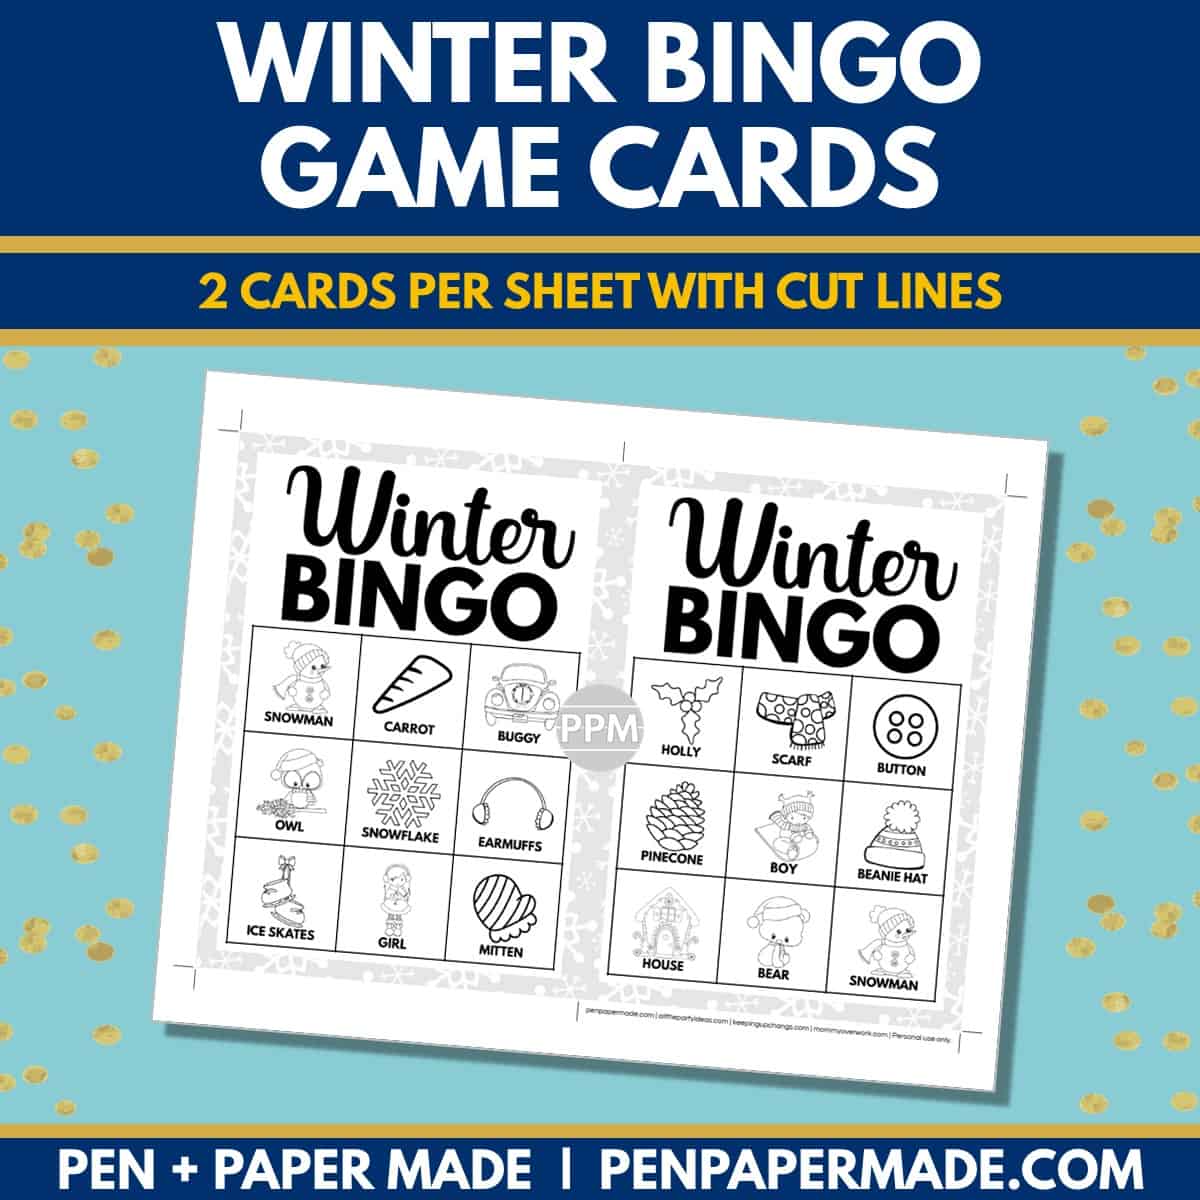 winter bingo card 3x3 5x7 game boards with images and text words.